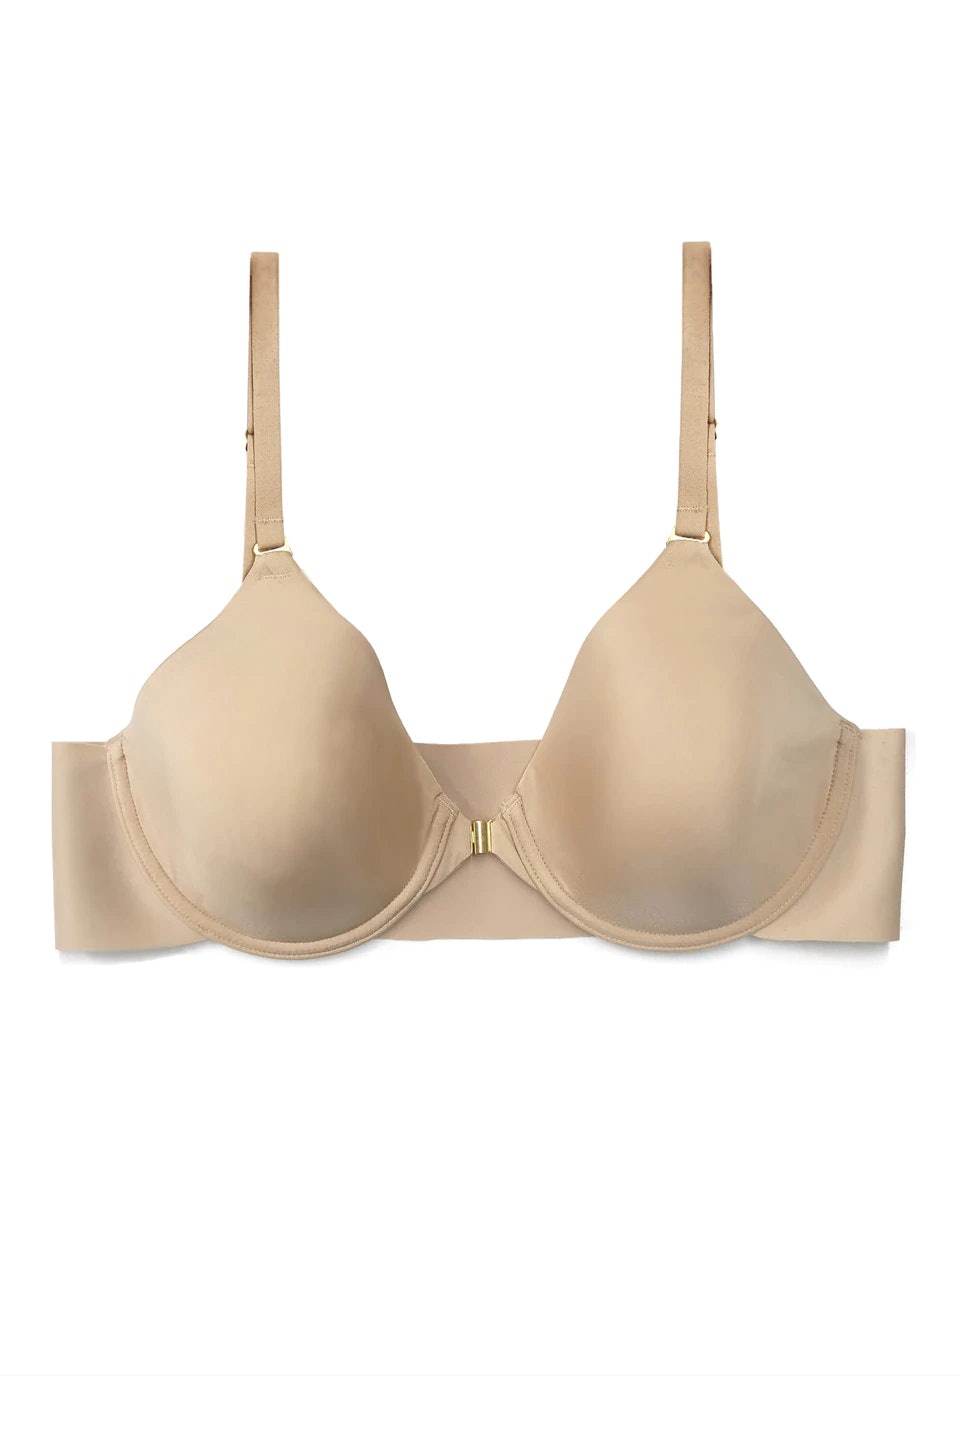 10 Comfy Front-Closure Bras You Actually Won't Mind Wearing